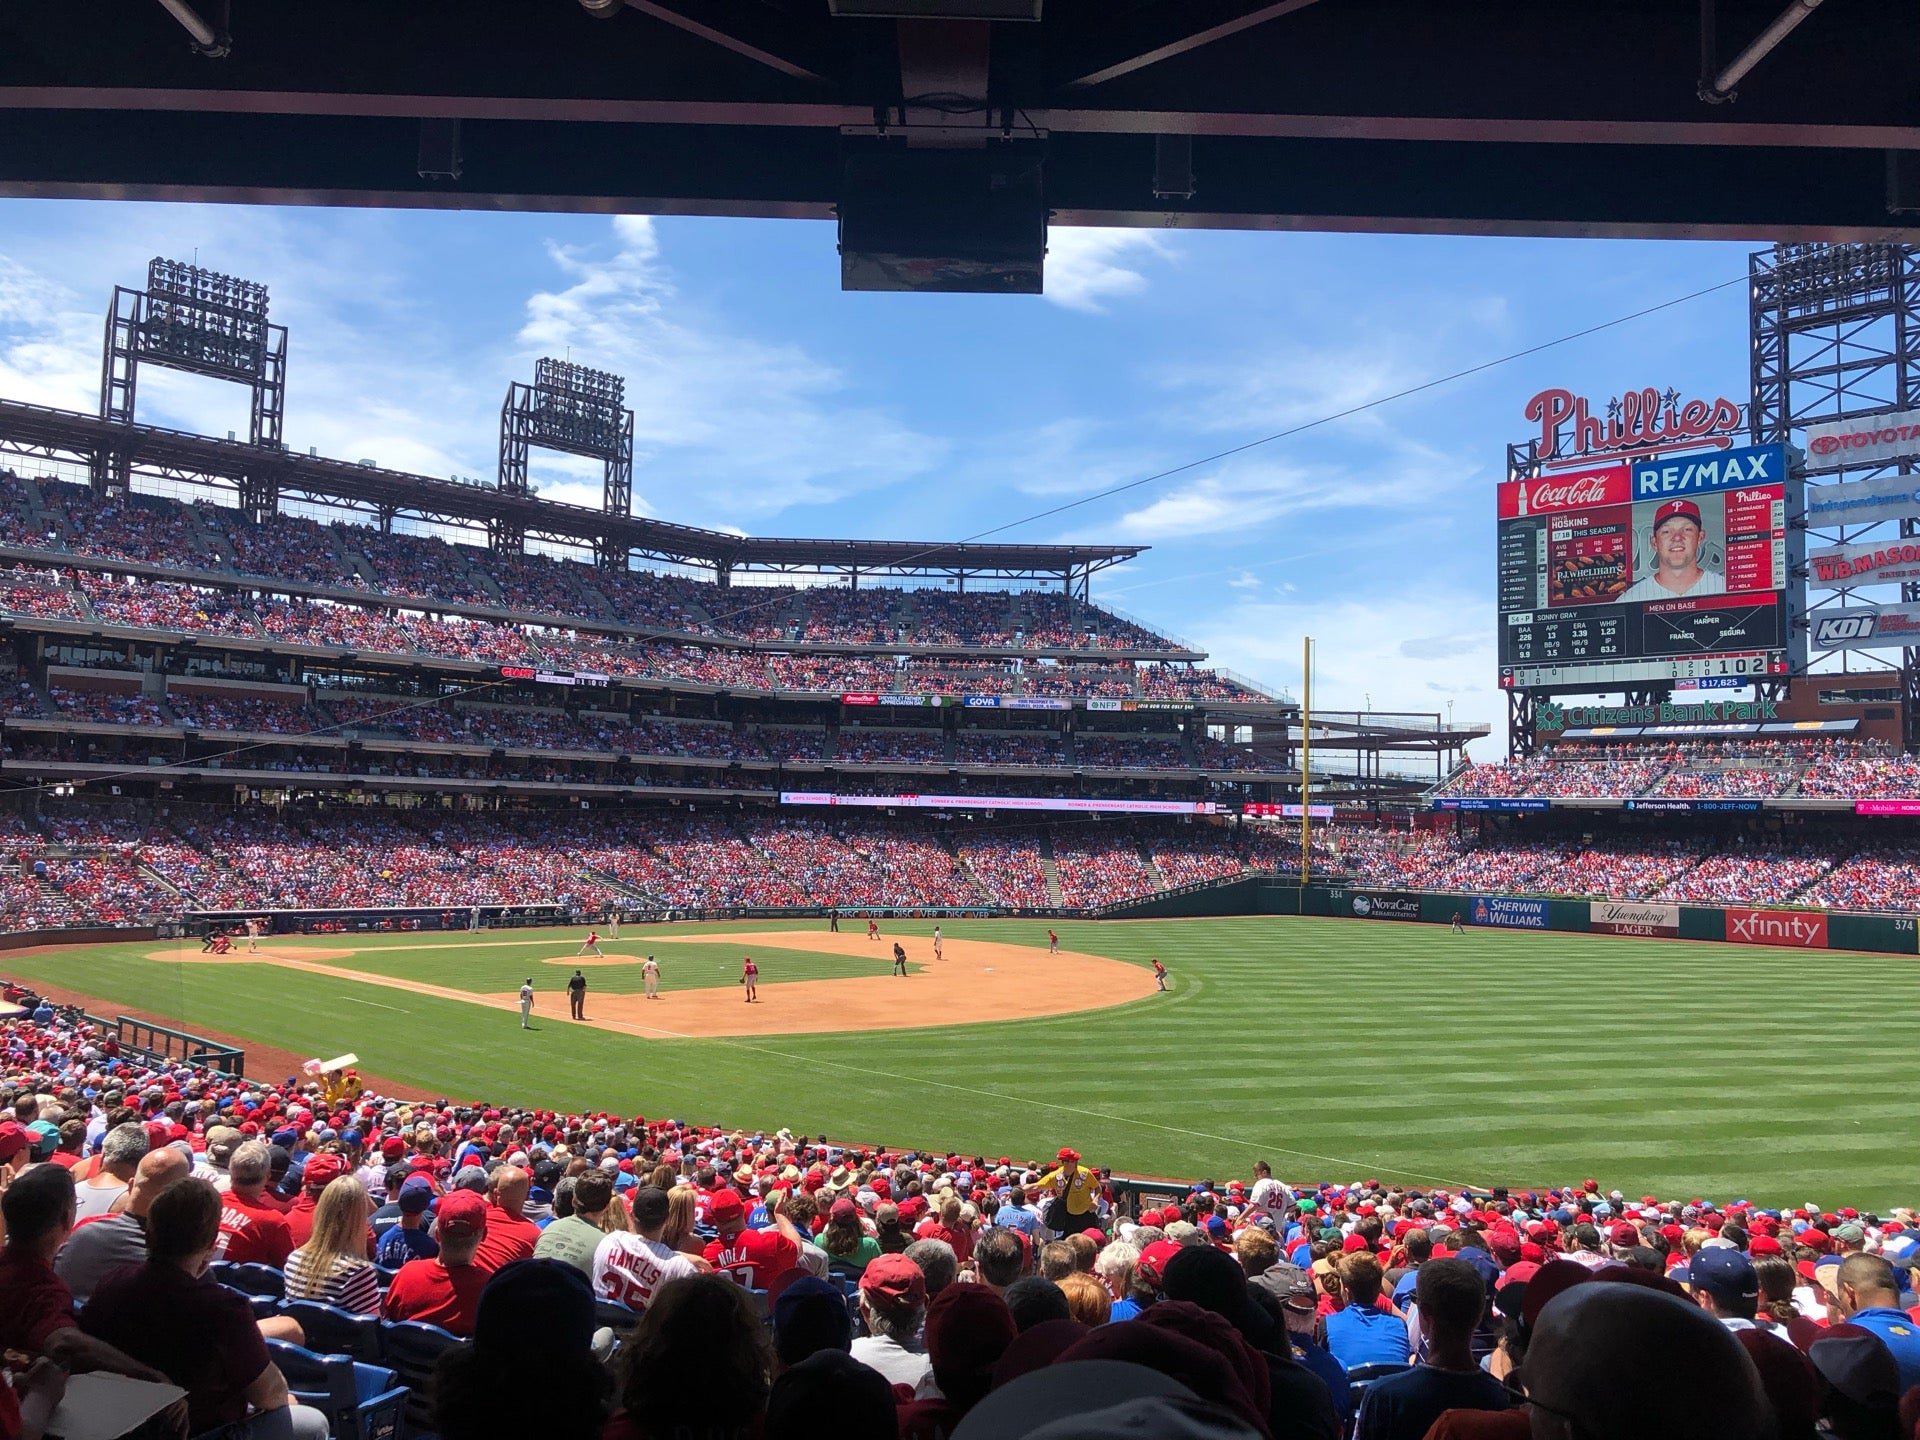 1,500 games at Citizens Bank Park - The Good Phight